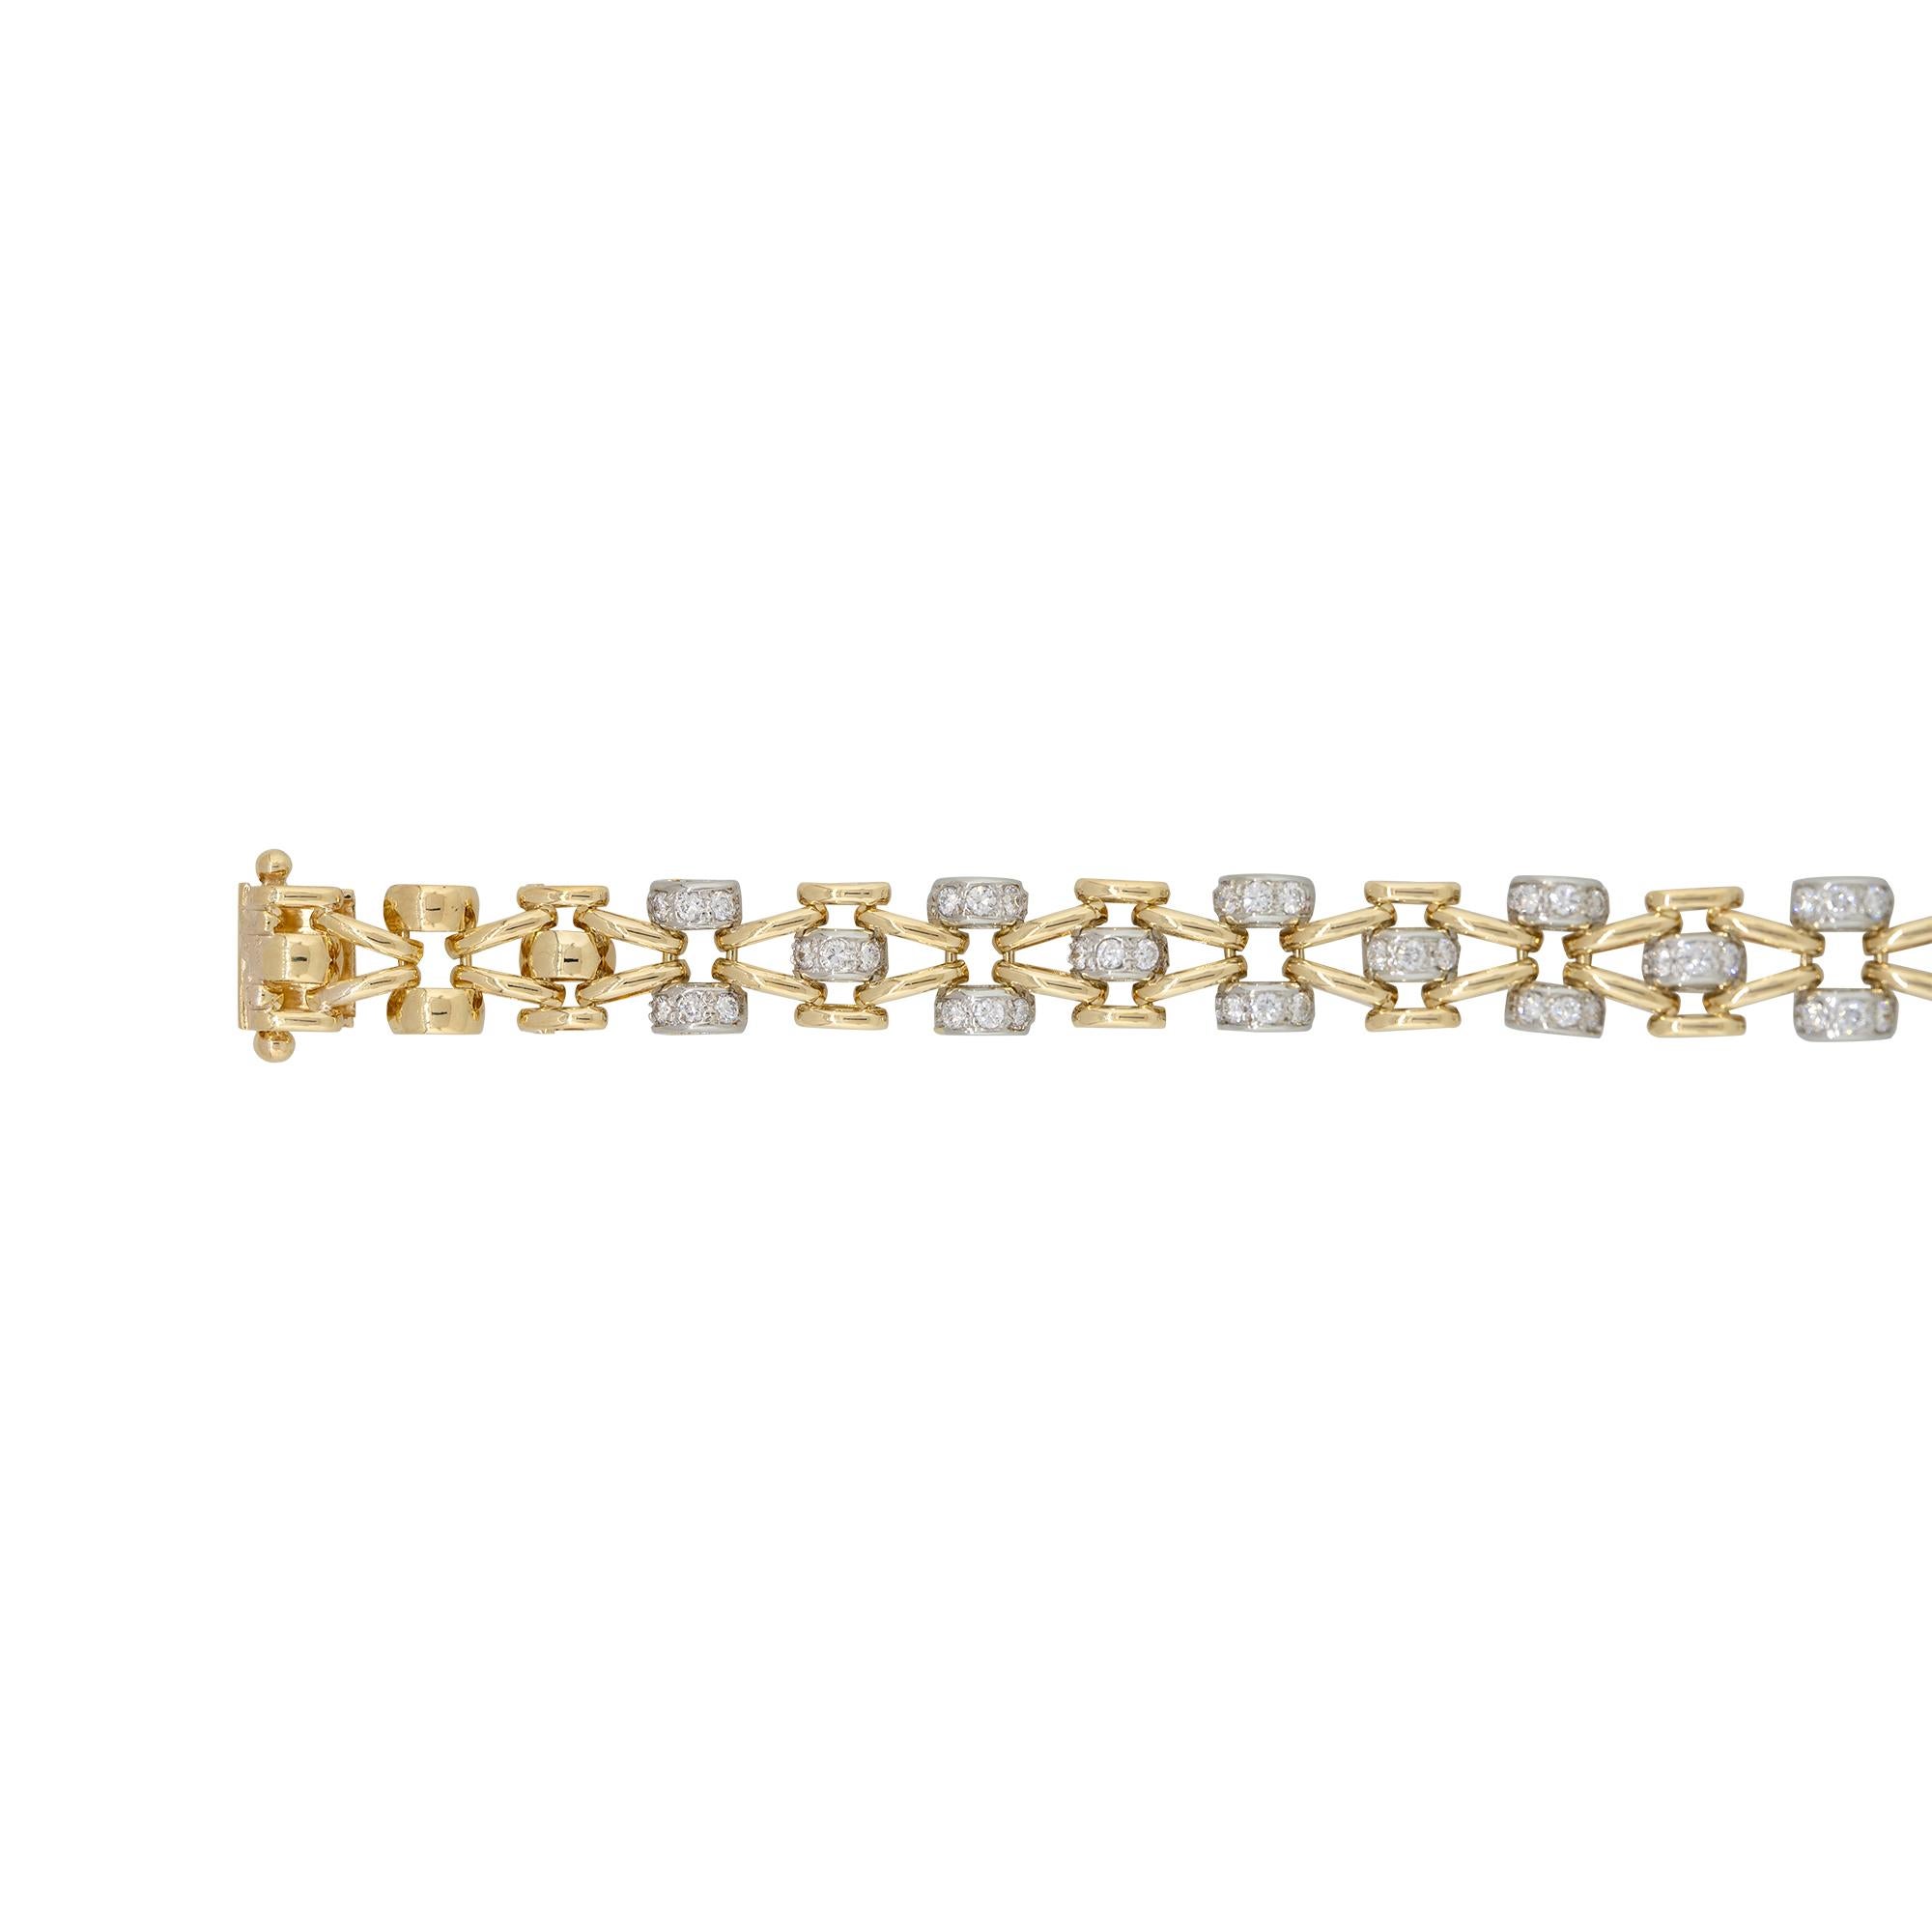 18k Two-Tone Gold 1.17ct Diamond Set Open Link Bracelet
Material: 18k White & Yellow Gold
Diamond Details: There are approximately 1.17 carats of round brilliant-cut diamonds
Diamond Clarity: All diamonds are approximately SI (Slightly Included) in